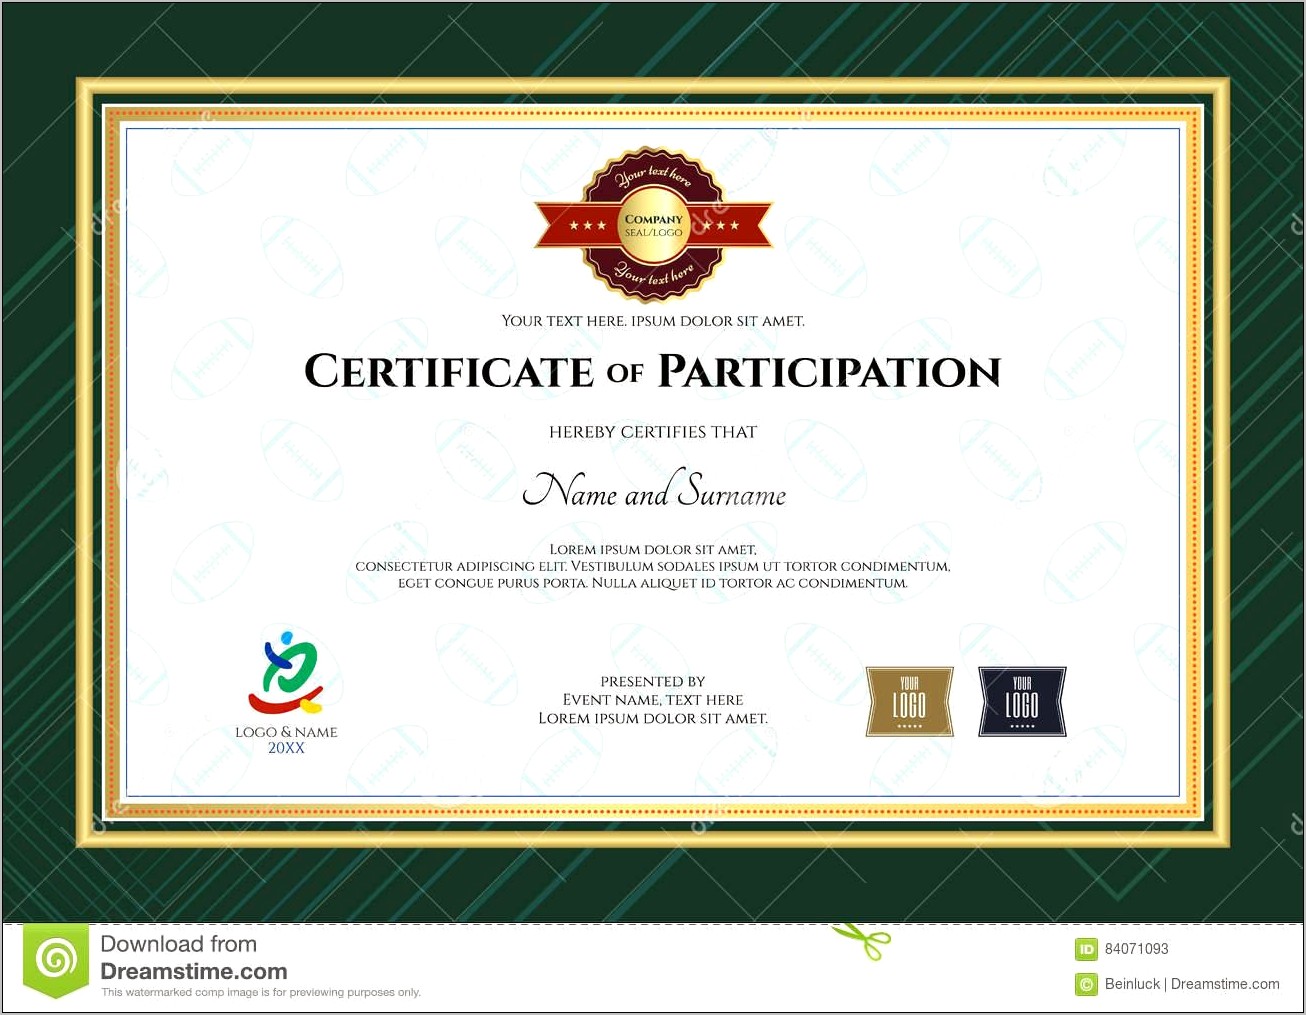 Printable Certificate Of Participation Templates Free